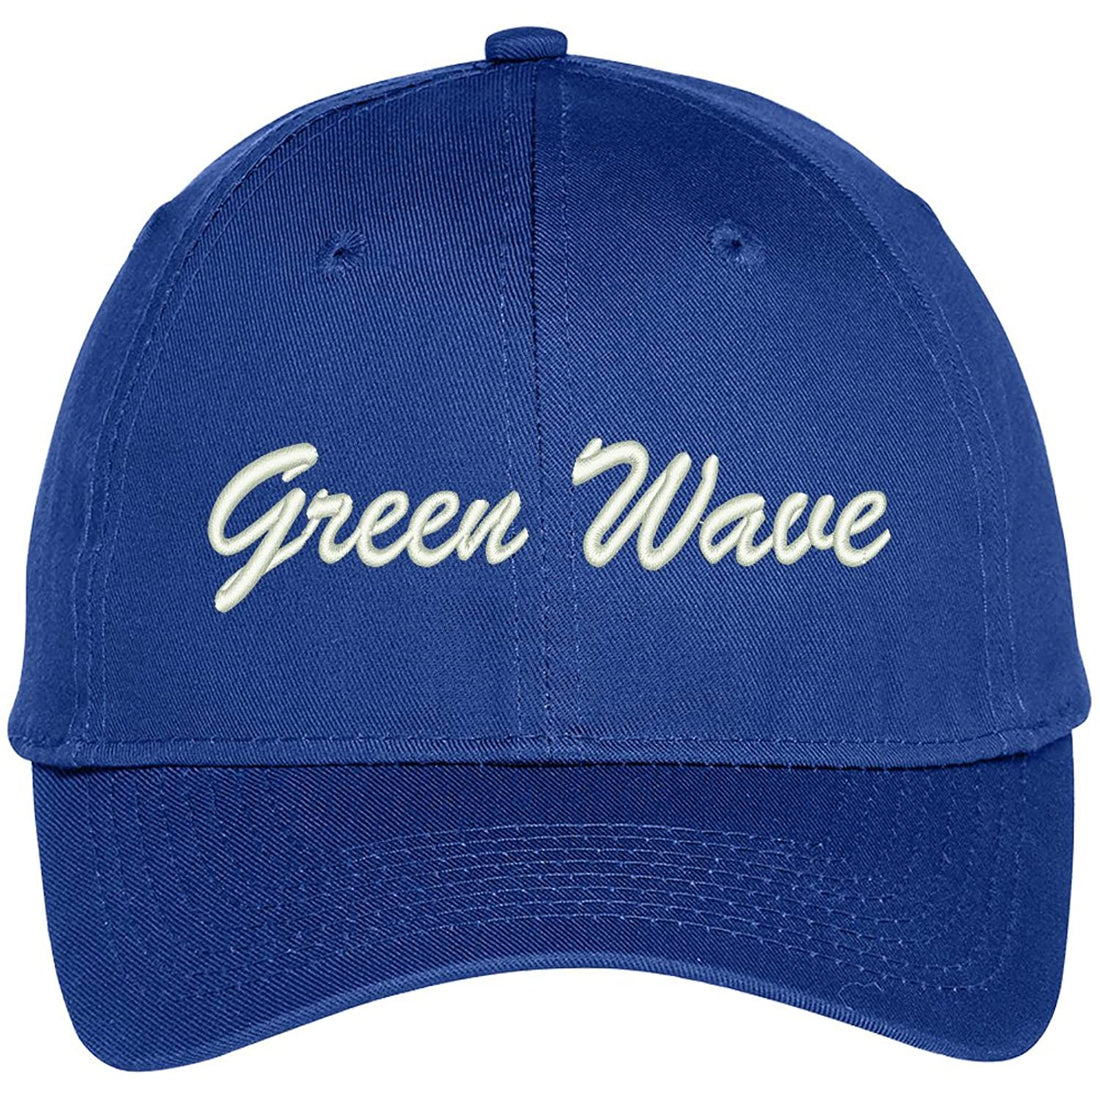 Trendy Apparel Shop Green Wave Embroidered Team Nickname Mascot Cap